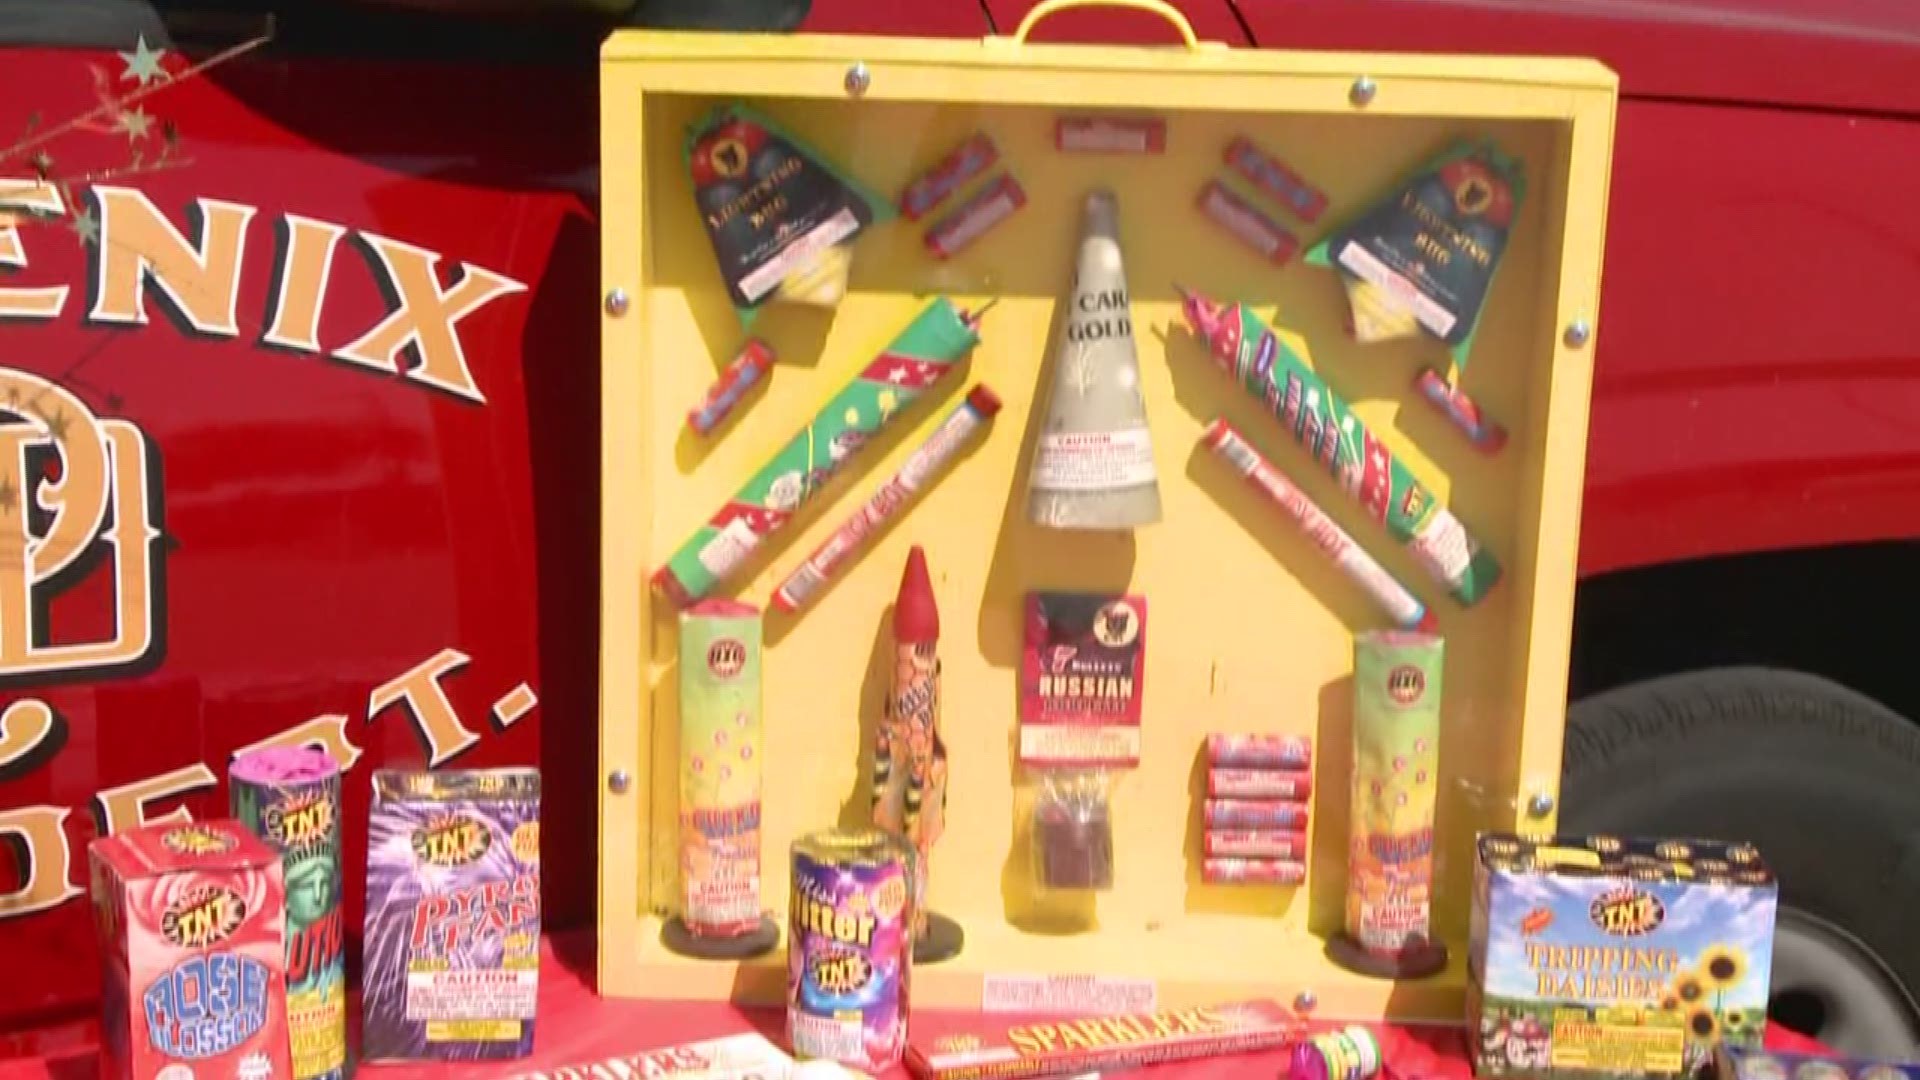 Phoenix fire department shares these safety precautions to avoid small fireworks danger.